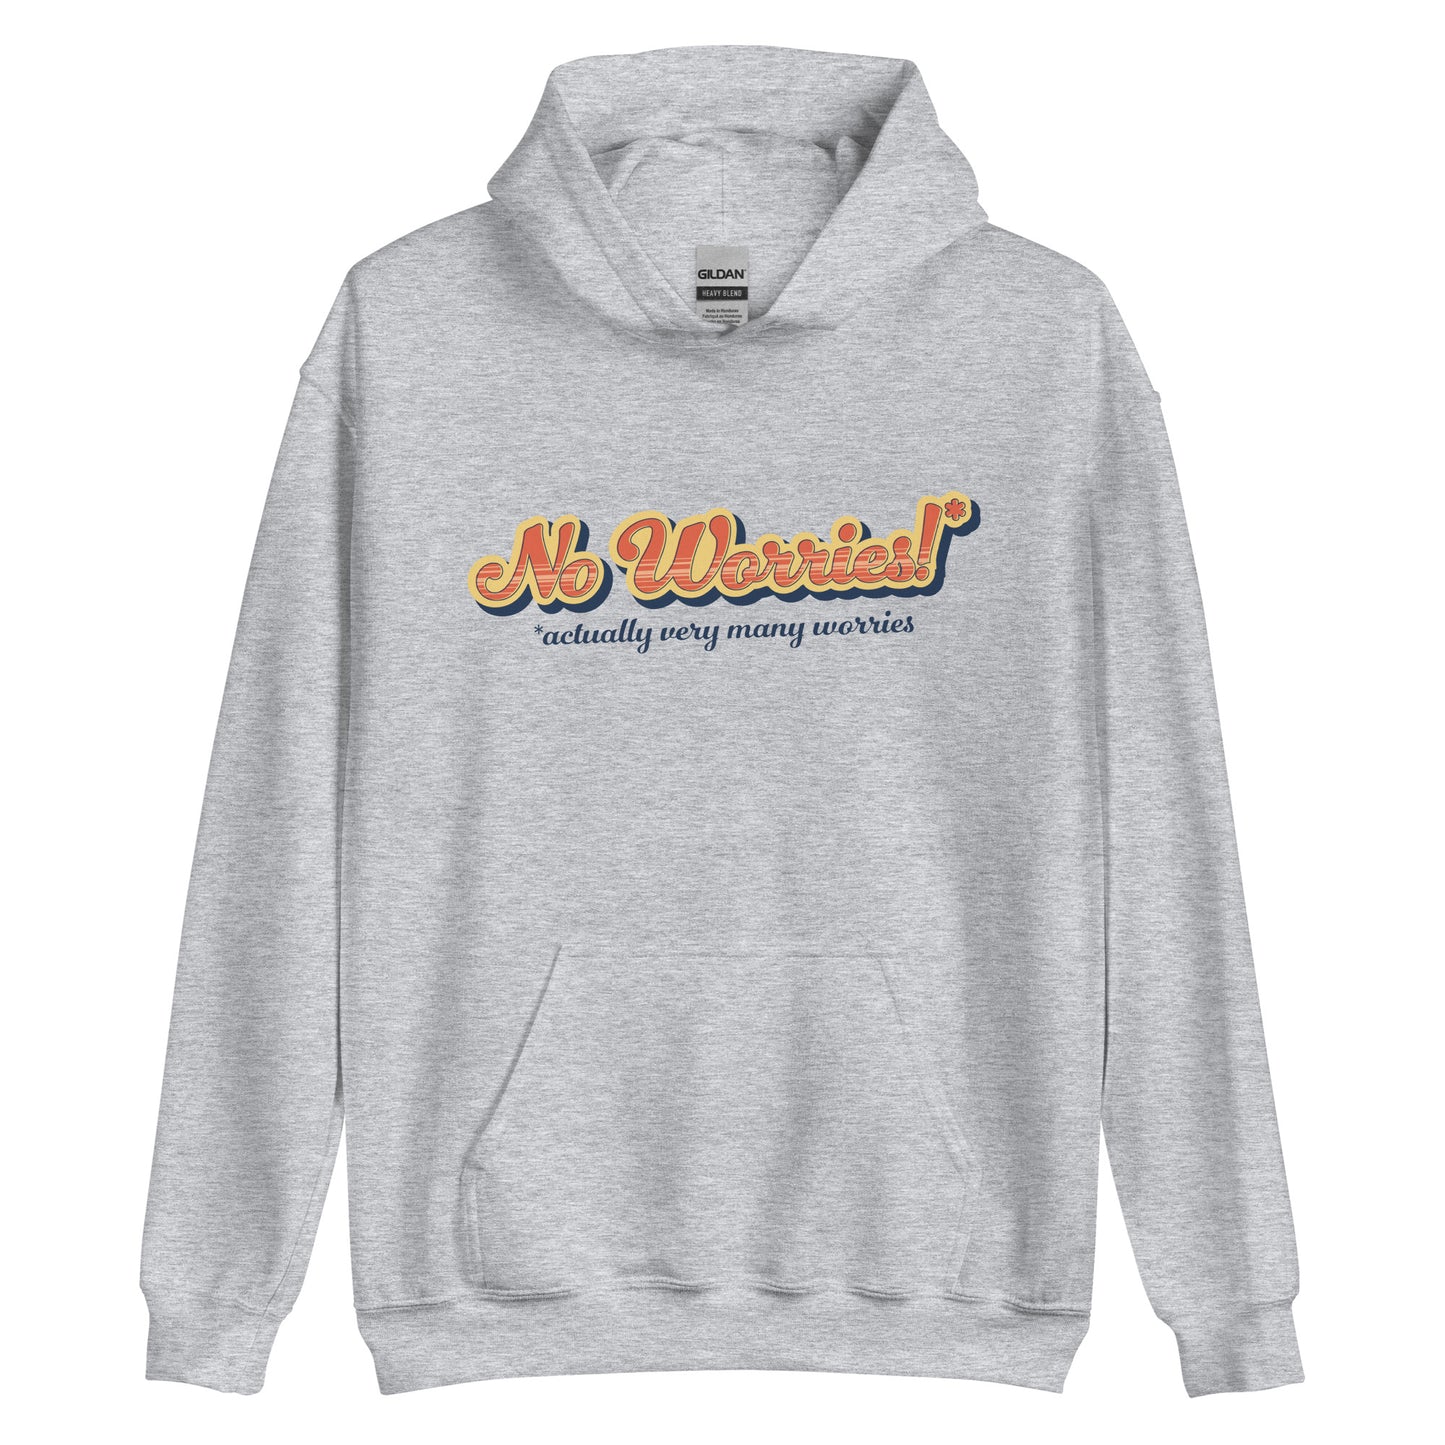 A light grey hooded sweatshirt featuring vintage style text that reads "No worries!* *actually very many worries"